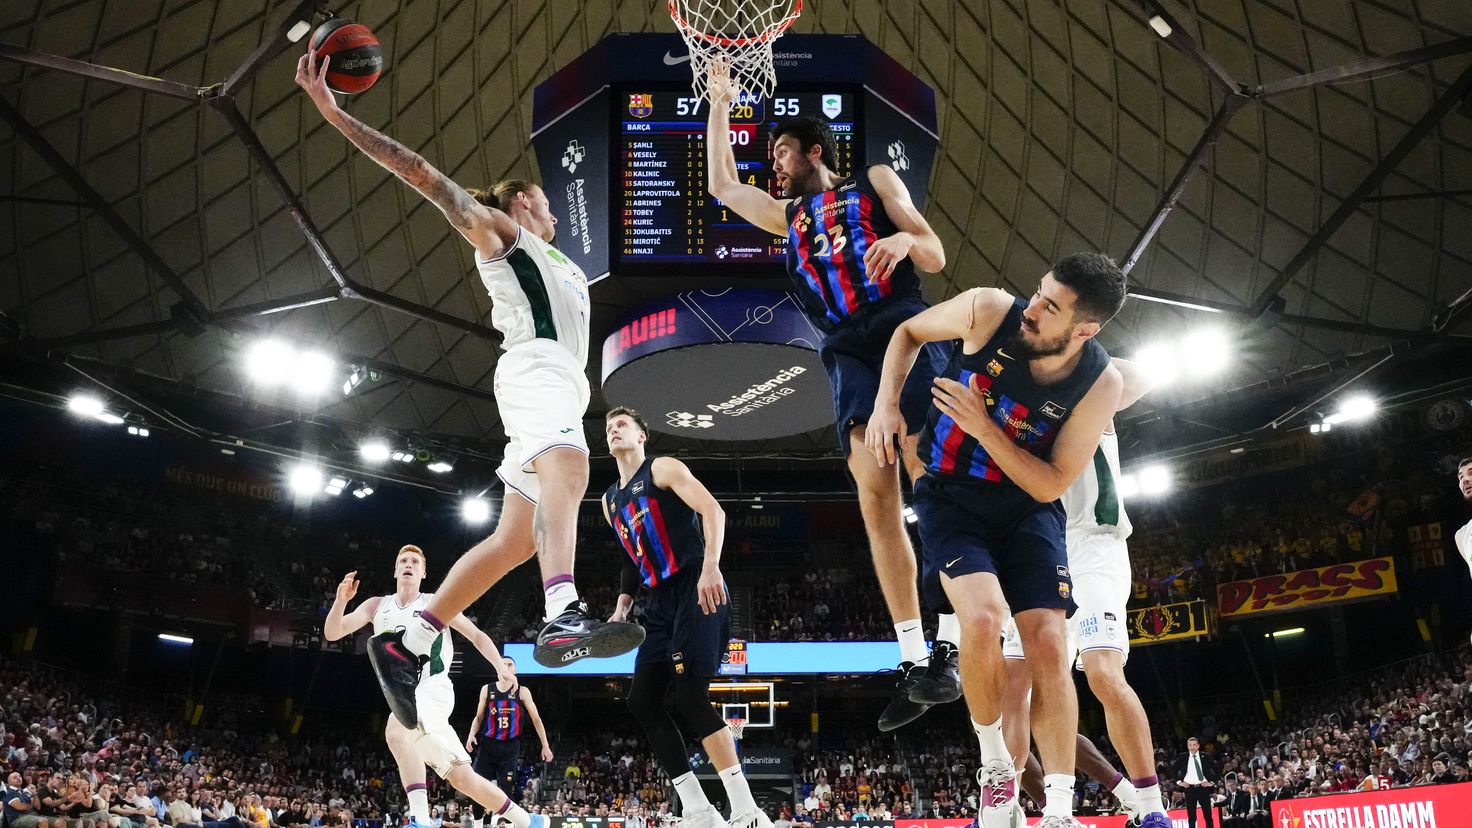 Barça wants to transfer all the pressure to Unicaja
